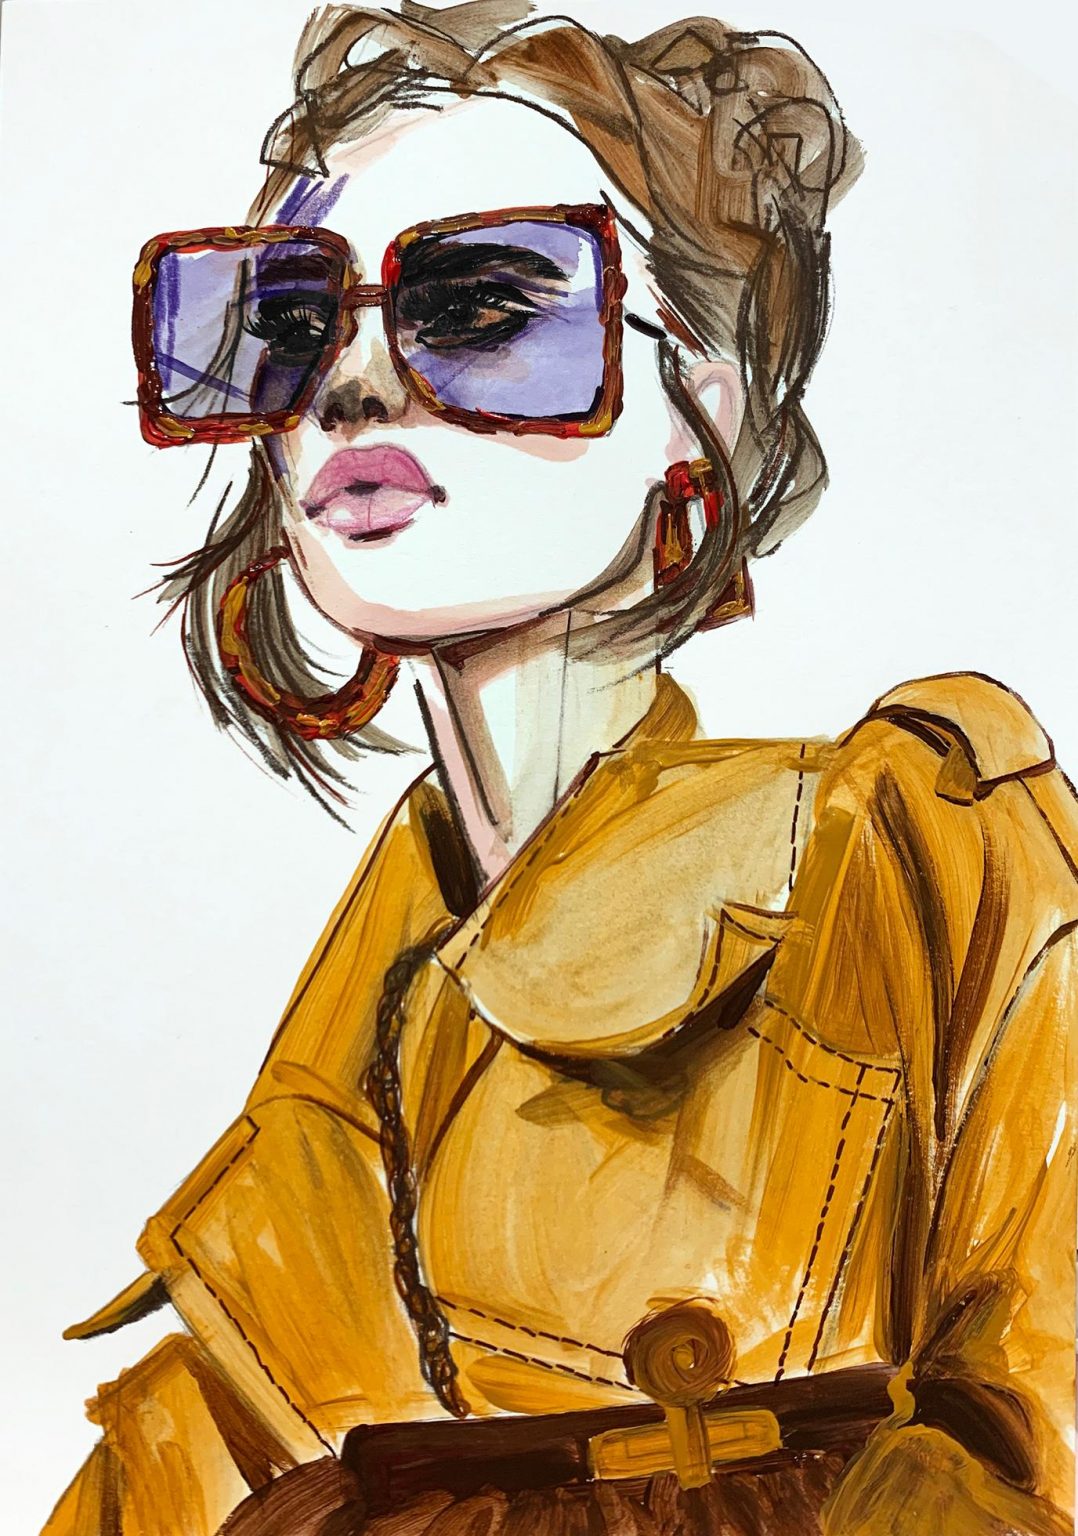 The Artistry Behind Fashion Illustrations